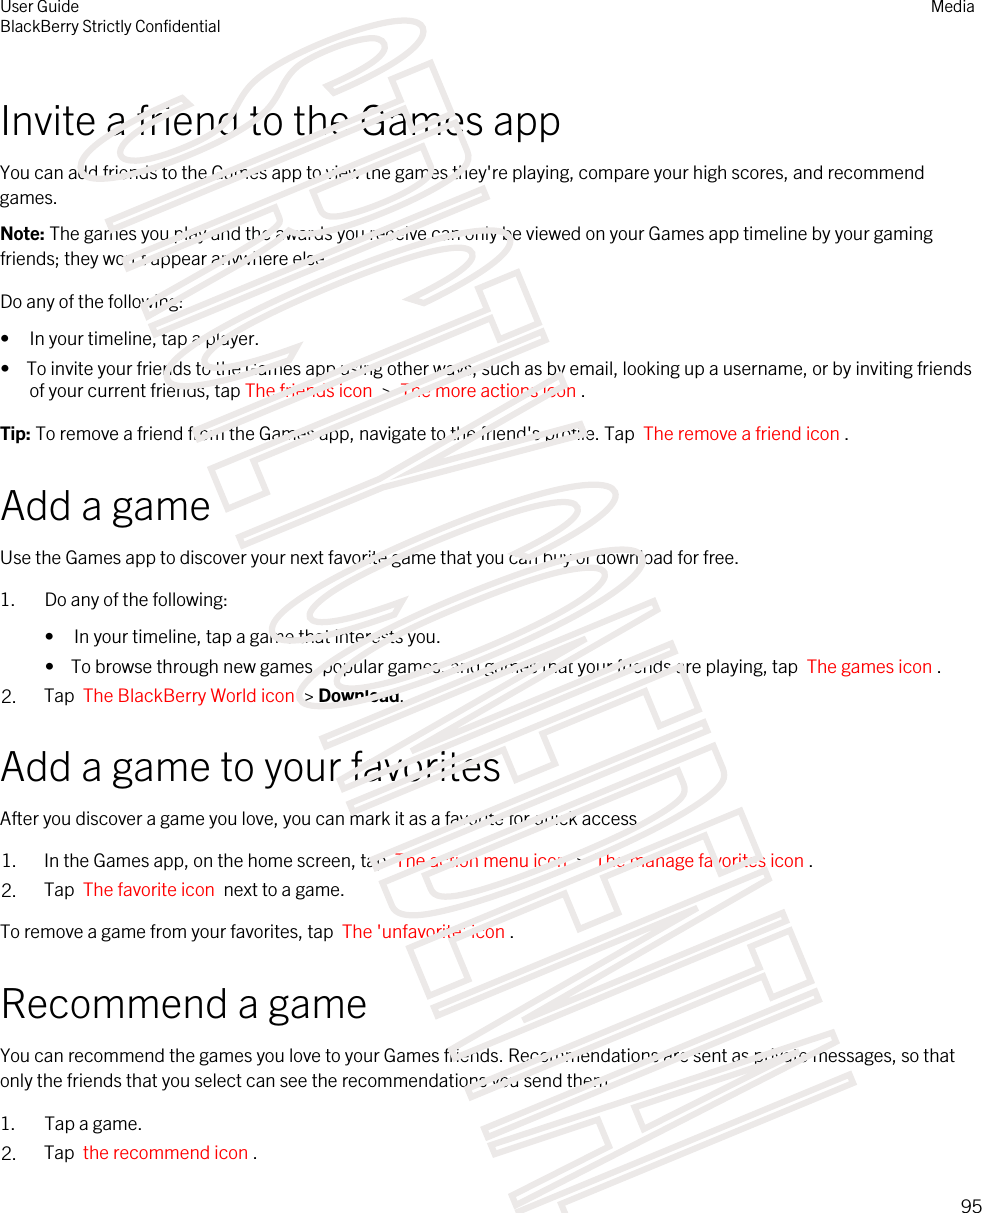 Invite a friend to the Games appYou can add friends to the Games app to view the games they&apos;re playing, compare your high scores, and recommend games.Note: The games you play and the awards you receive can only be viewed on your Games app timeline by your gaming friends; they won&apos;t appear anywhere else.Do any of the following:• In your timeline, tap a player.•  To invite your friends to the Games app using other ways, such as by email, looking up a username, or by inviting friends of your current friends, tap The friends icon  &gt;  The more actions icon .Tip: To remove a friend from the Games app, navigate to the friend&apos;s profile. Tap  The remove a friend icon .Add a gameUse the Games app to discover your next favorite game that you can buy or download for free.1. Do any of the following:• In your timeline, tap a game that interests you.•  To browse through new games, popular games, and games that your friends are playing, tap  The games icon .2. Tap  The BlackBerry World icon  &gt; Download.Add a game to your favoritesAfter you discover a game you love, you can mark it as a favorite for quick access.1. In the Games app, on the home screen, tap  The action menu icon  &gt;  The manage favorites icon .2. Tap  The favorite icon  next to a game.To remove a game from your favorites, tap  The &apos;unfavorite&apos; icon .Recommend a gameYou can recommend the games you love to your Games friends. Recommendations are sent as private messages, so that only the friends that you select can see the recommendations you send them.1. Tap a game.2. Tap  the recommend icon . User GuideBlackBerry Strictly ConfidentialMedia95STRICTLY CONFIDENTIAL